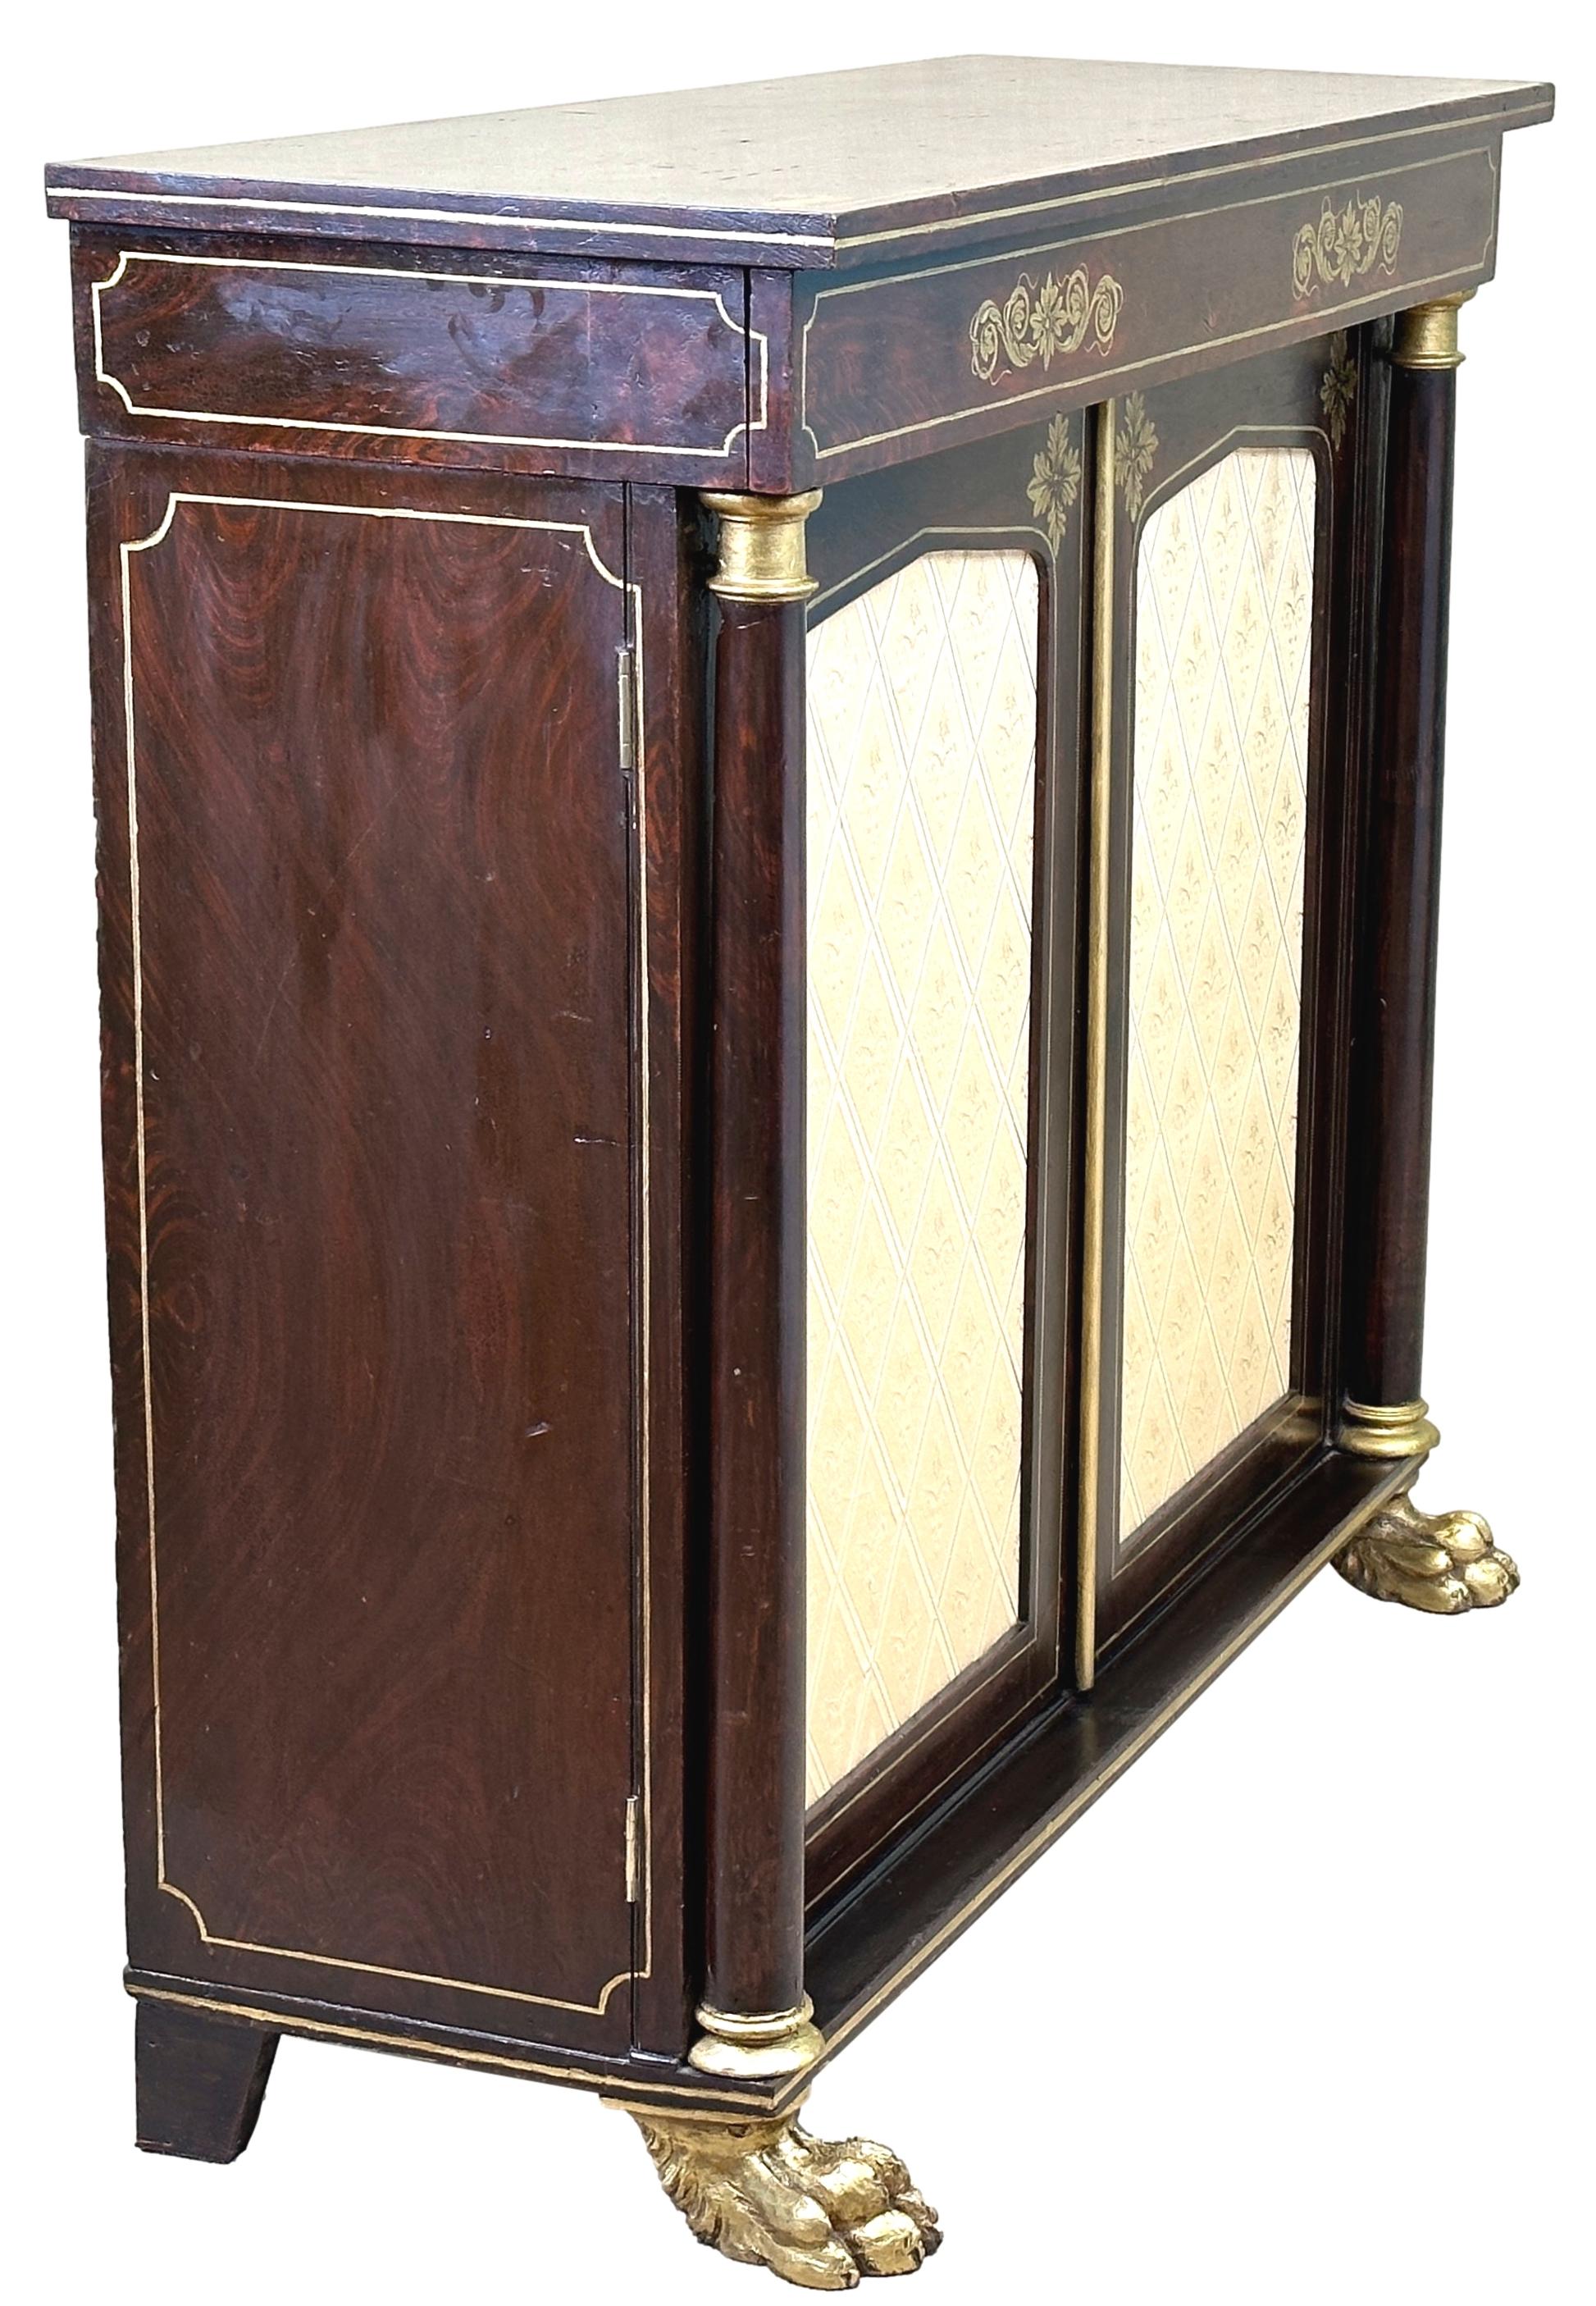 An Extremely Attractive Early 19th Century, Regency Period, Simulated Rosewood Side Cabinet, Having Elegant Parcel Gilt Decoration Throughout, The One Long Drawer Over Two Upholstered Panel Doors Flanked By Turned Columns, Raised On Fabulous